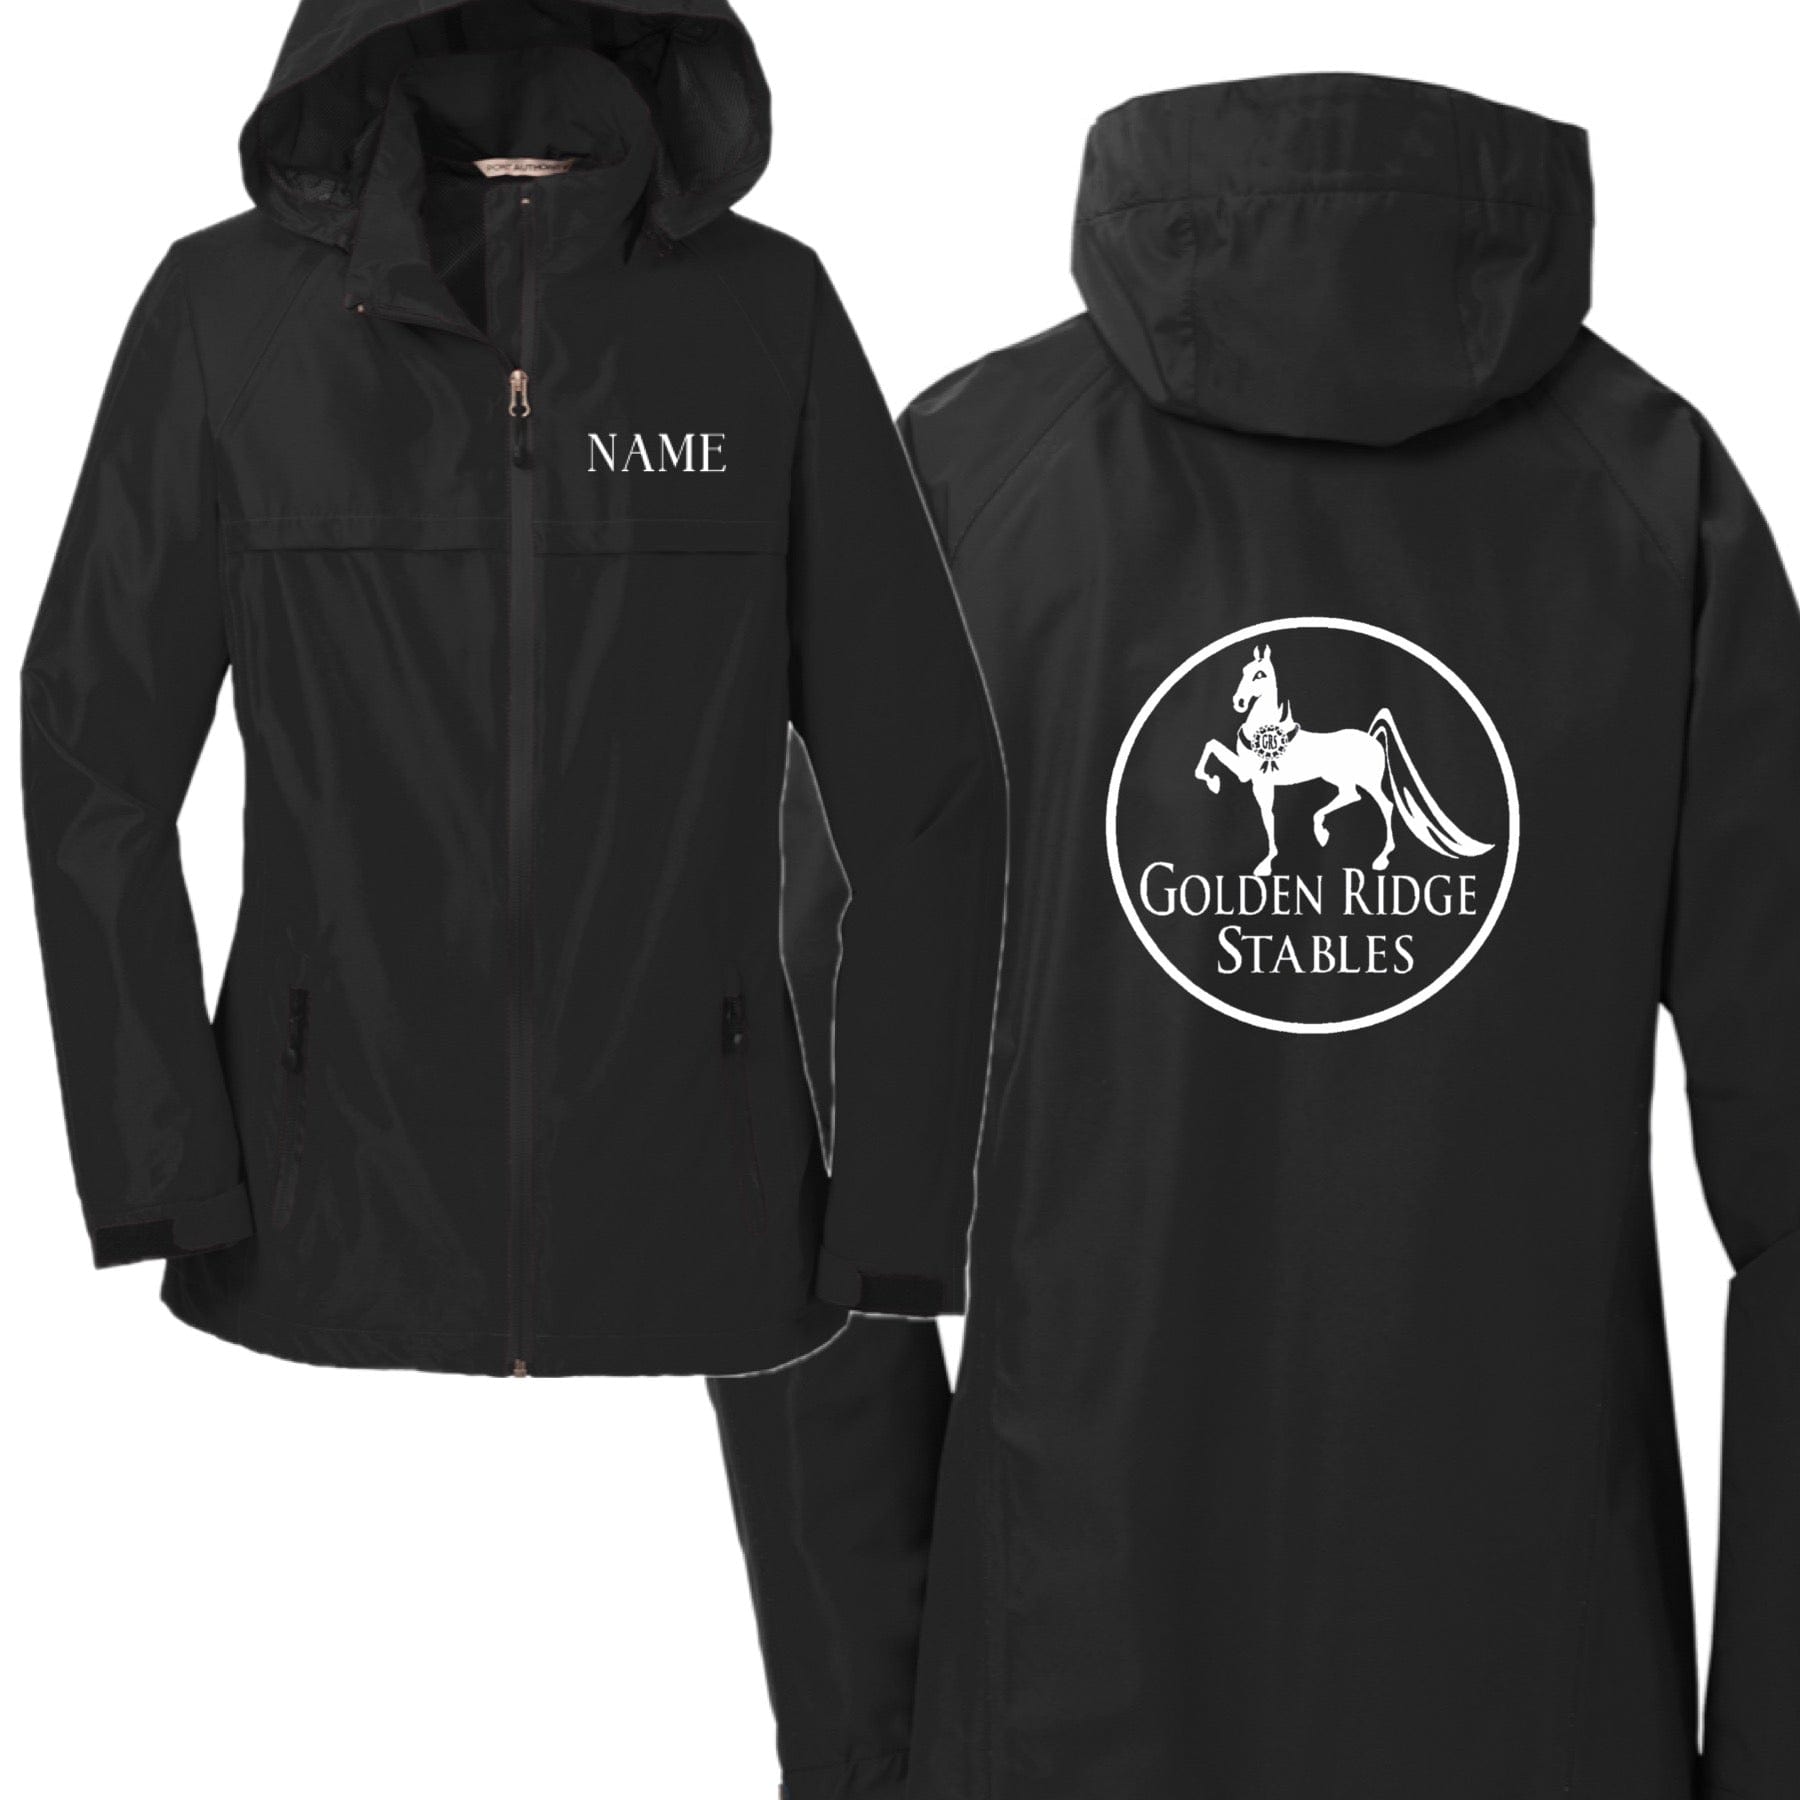 Equestrian Team Apparel Golden Ridge Stables Raincoat equestrian team apparel online tack store mobile tack store custom farm apparel custom show stable clothing equestrian lifestyle horse show clothing riding clothes horses equestrian tack store